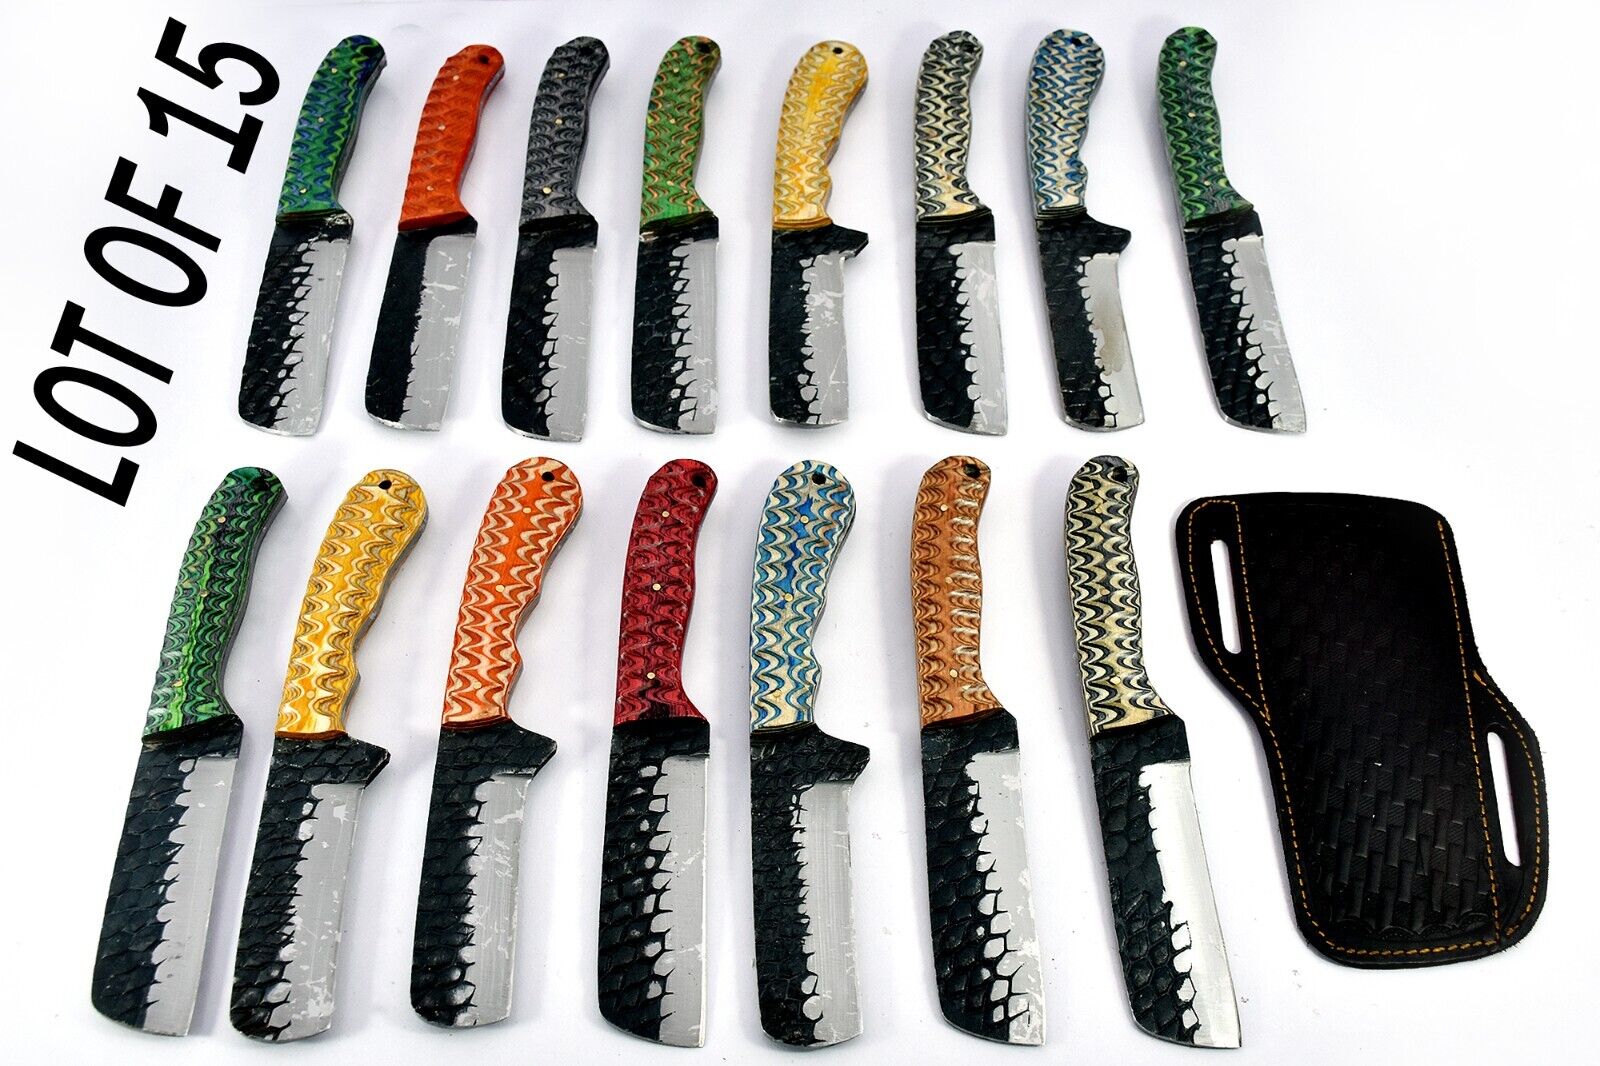 15 pieces Carbon steel Bull cuter knives with leather sheath UM-5047